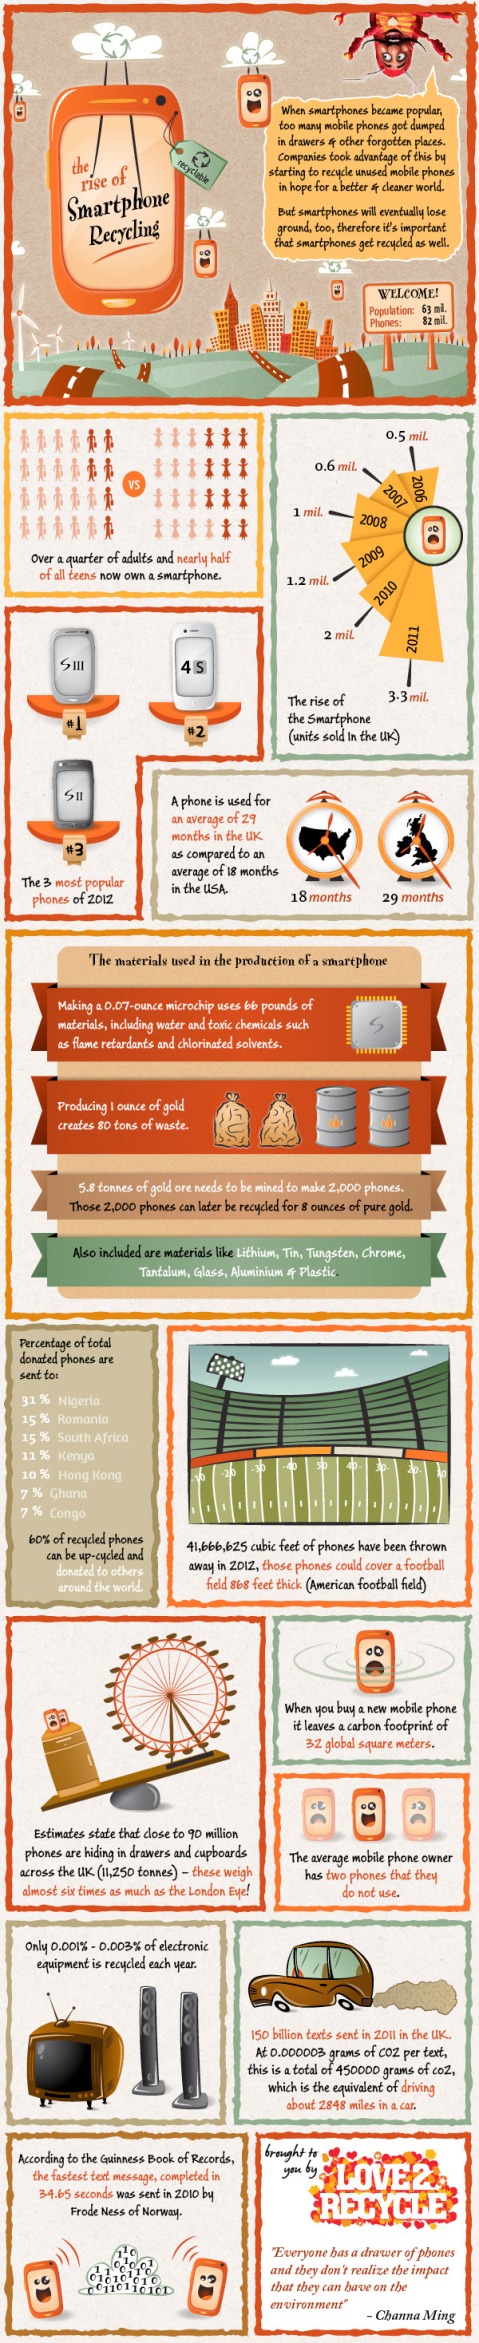 Smartphone Recycling Facts